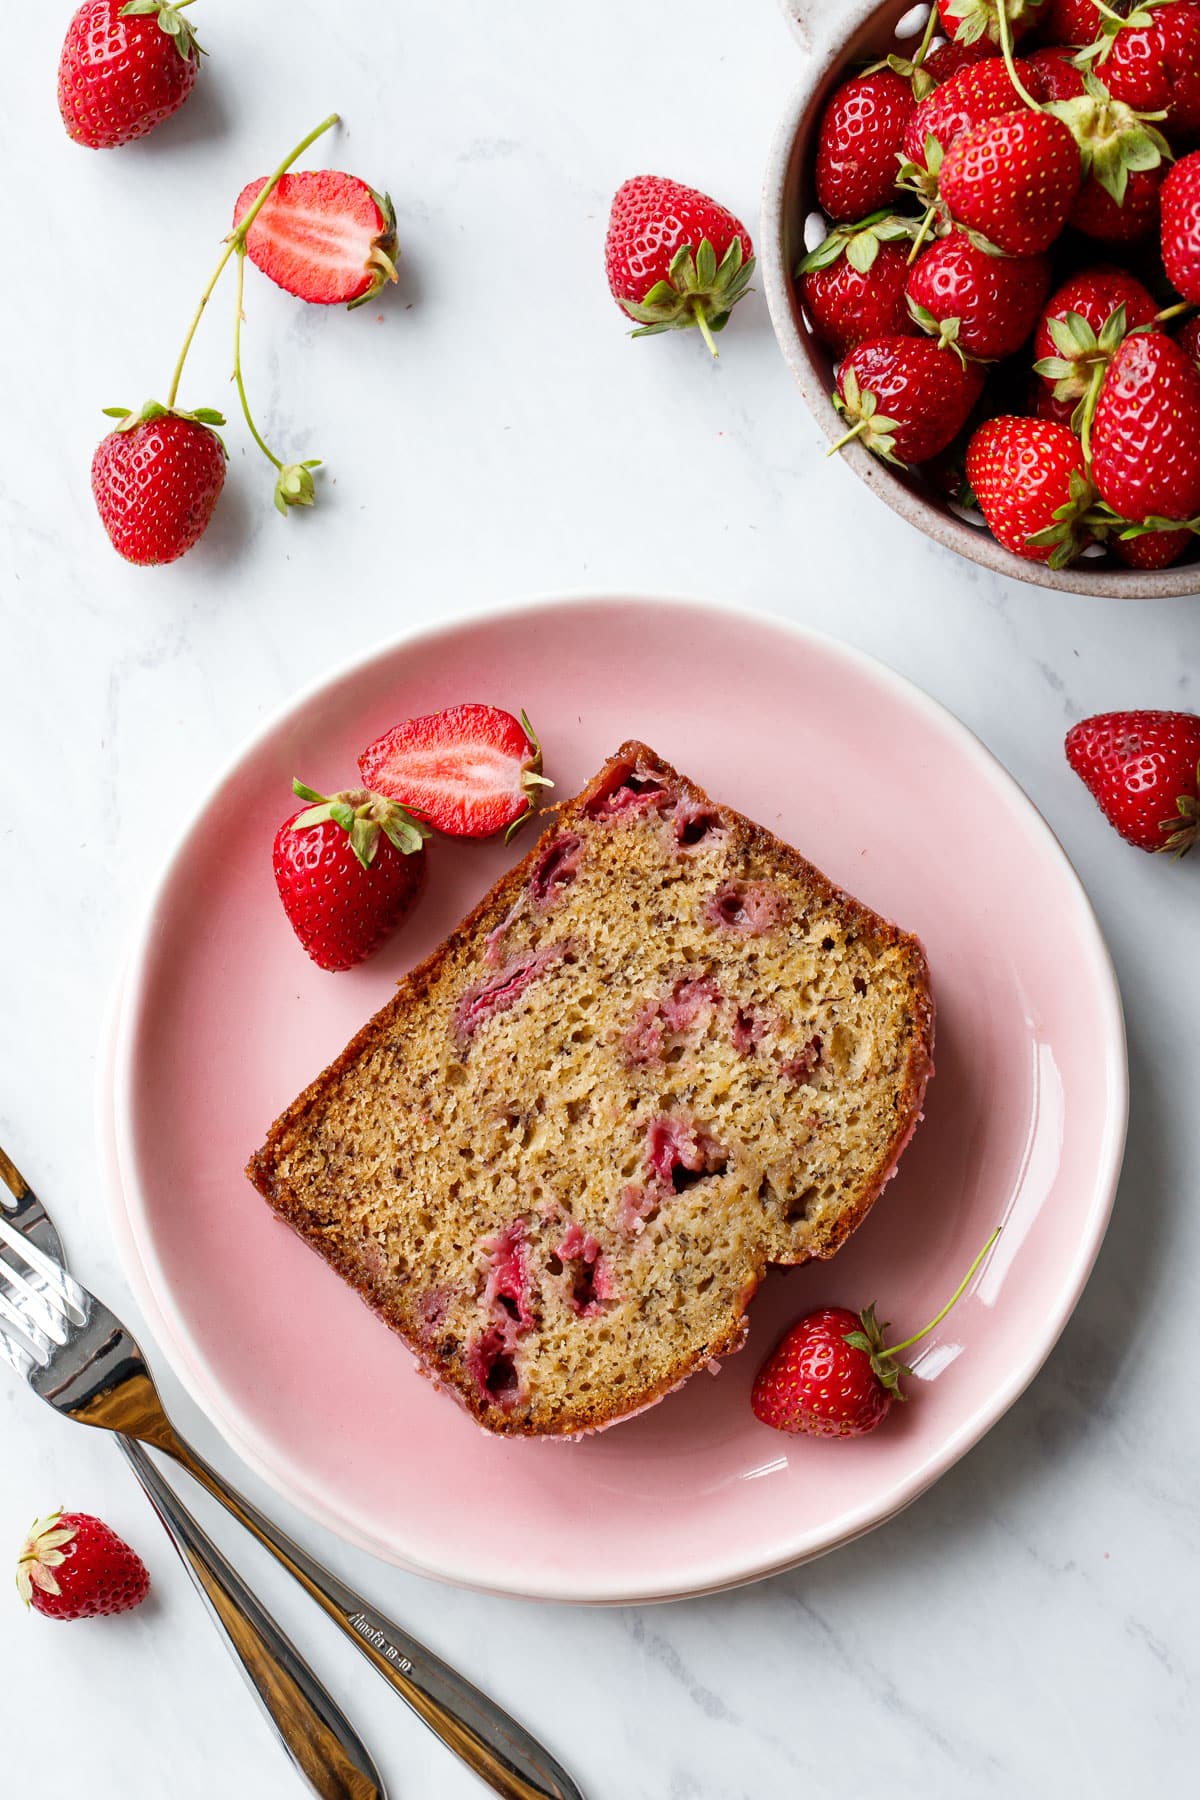 Overhead, slice of Strawberry Banana Bread on a pink plate showing the moist texture and strawberries studded throughout, with fresh strawberries scattered around.